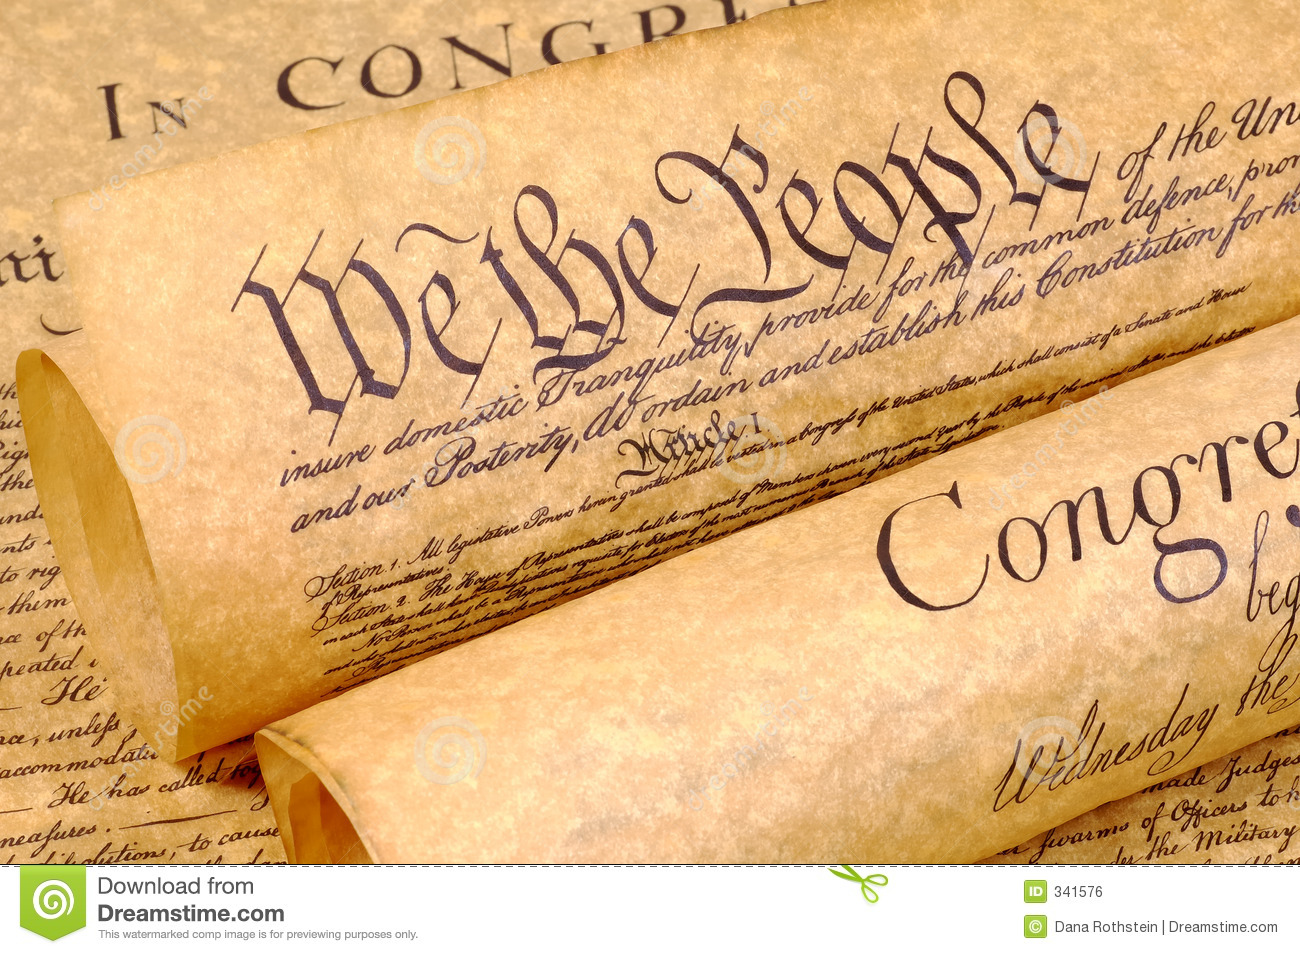 Declaration Of Independence Royalty Free Stock Image   Image  341576